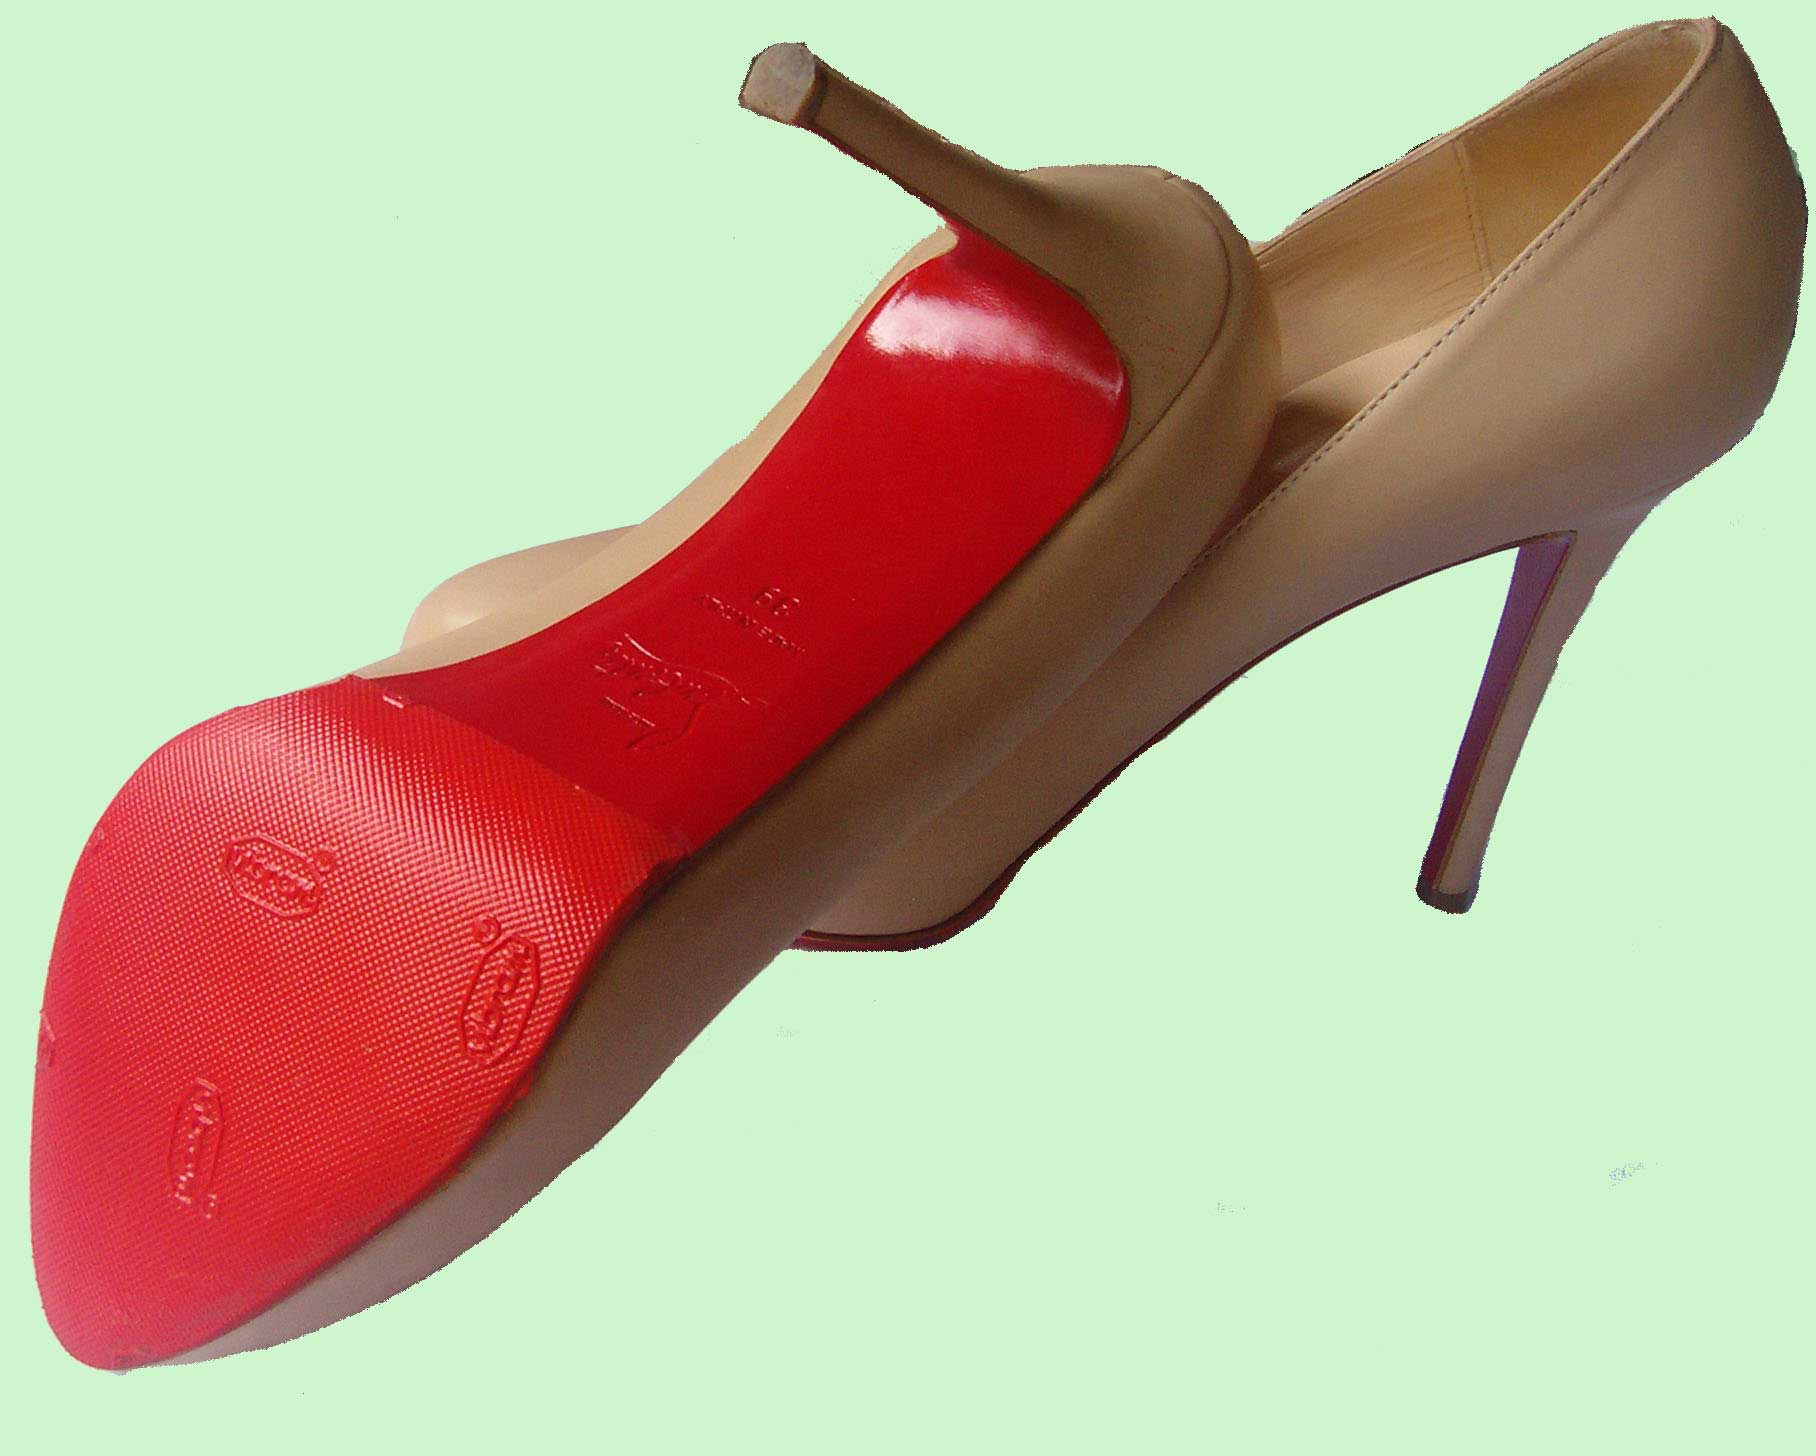 red sole shoe protectors